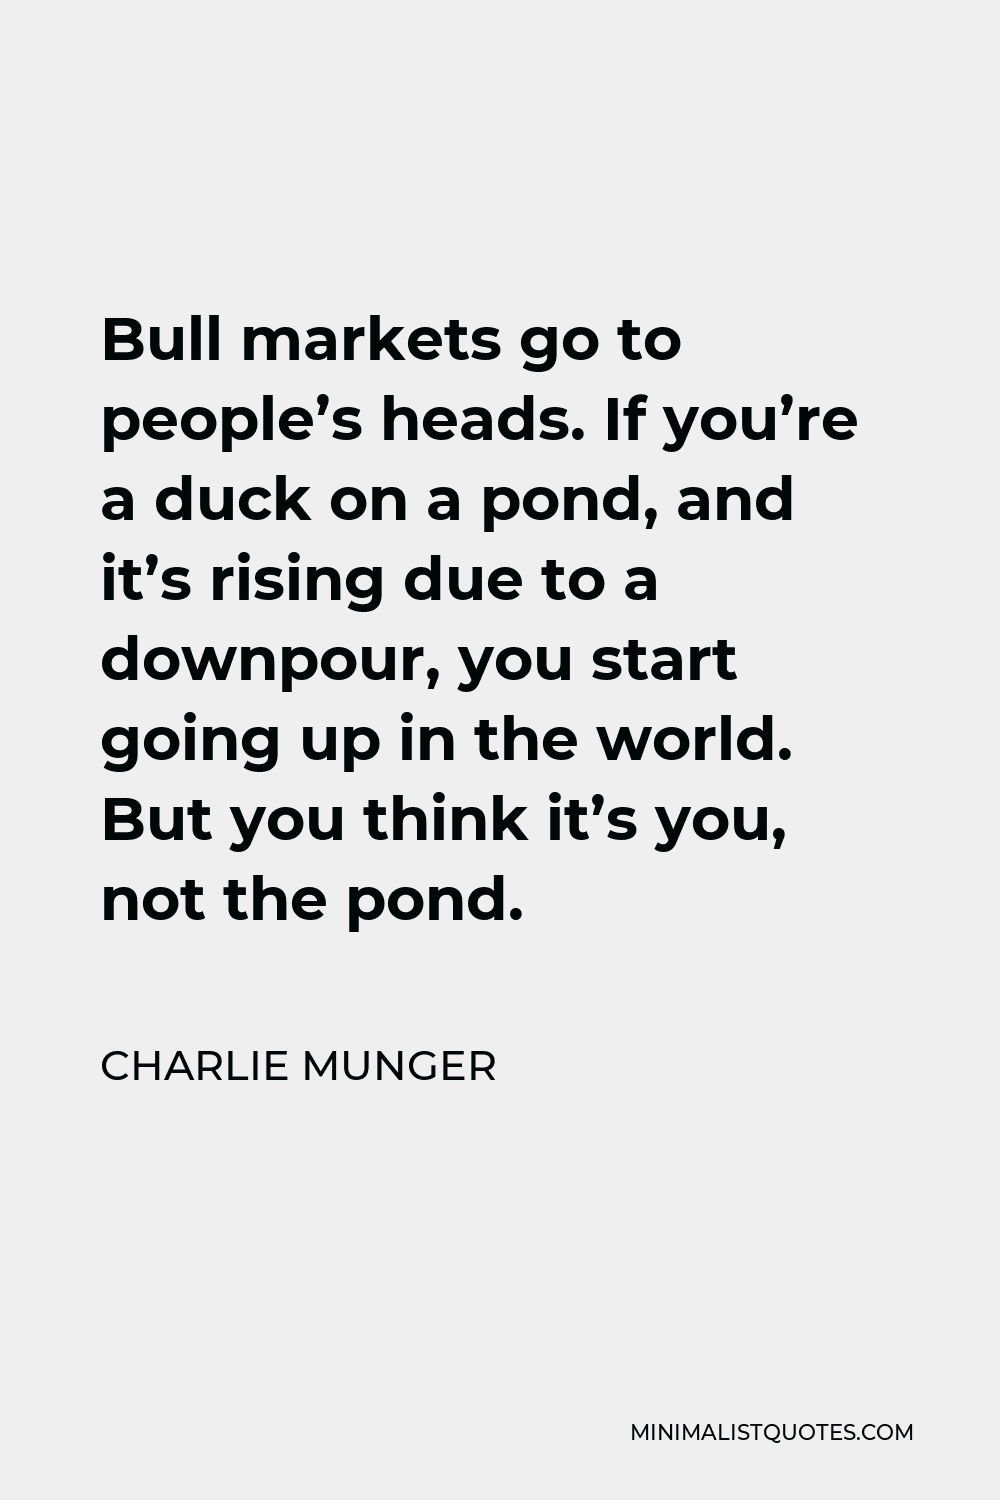 Charlie Munger Quote - Bull markets go to people’s heads. If you’re a duck on a pond, and it’s rising due to a downpour, you start going up in the world. But you think it’s you, not the pond.